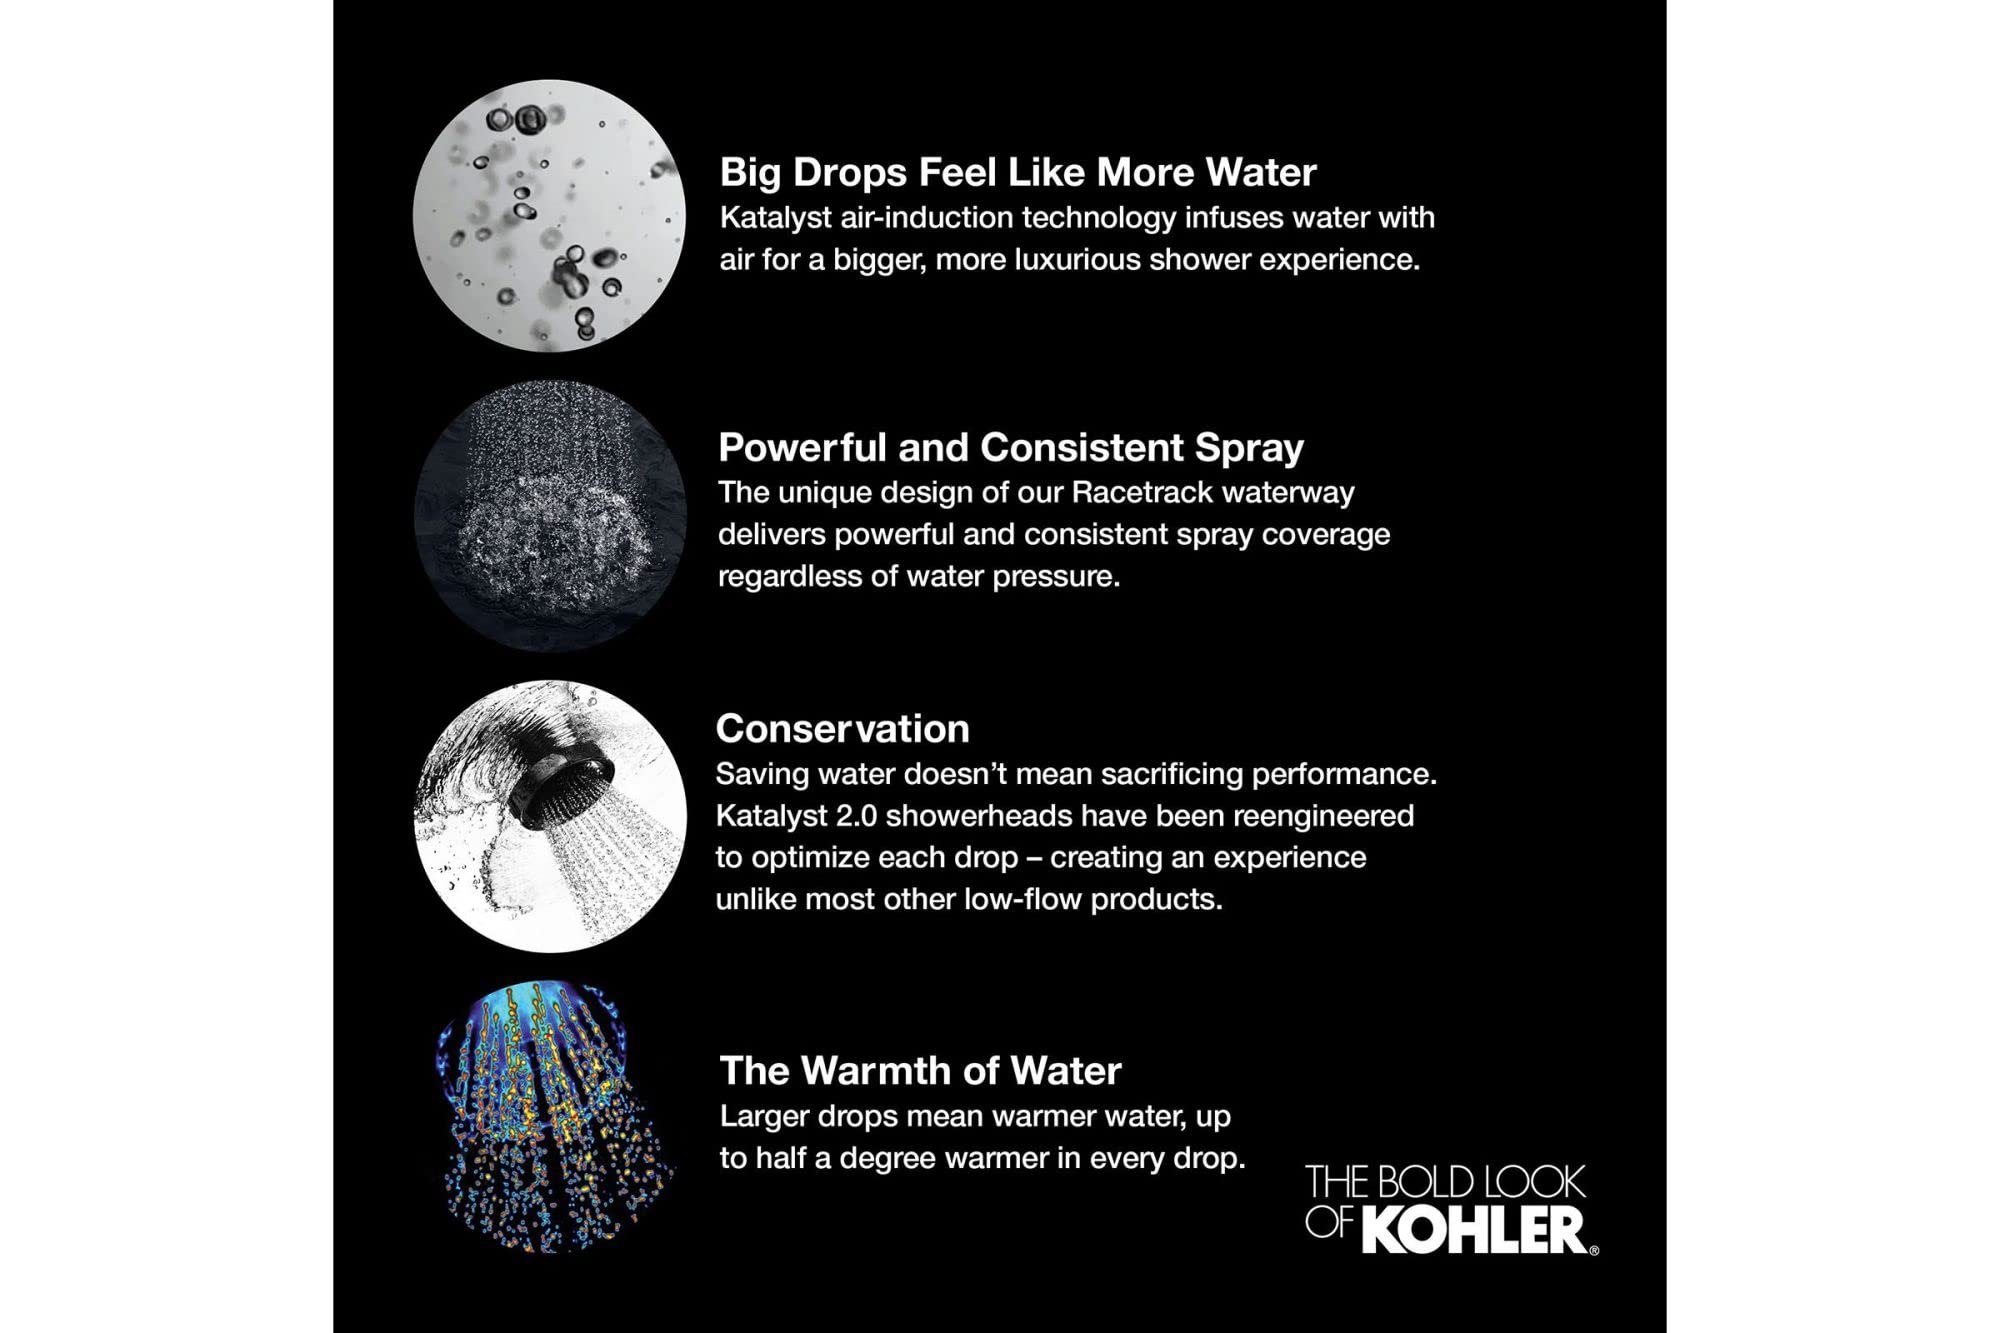 KOHLER 10282-AK-BN Forte 2.5 gpm Single-Function Showerhead with Katalyst Air-Induction Technology, 1, Brushed Nickel